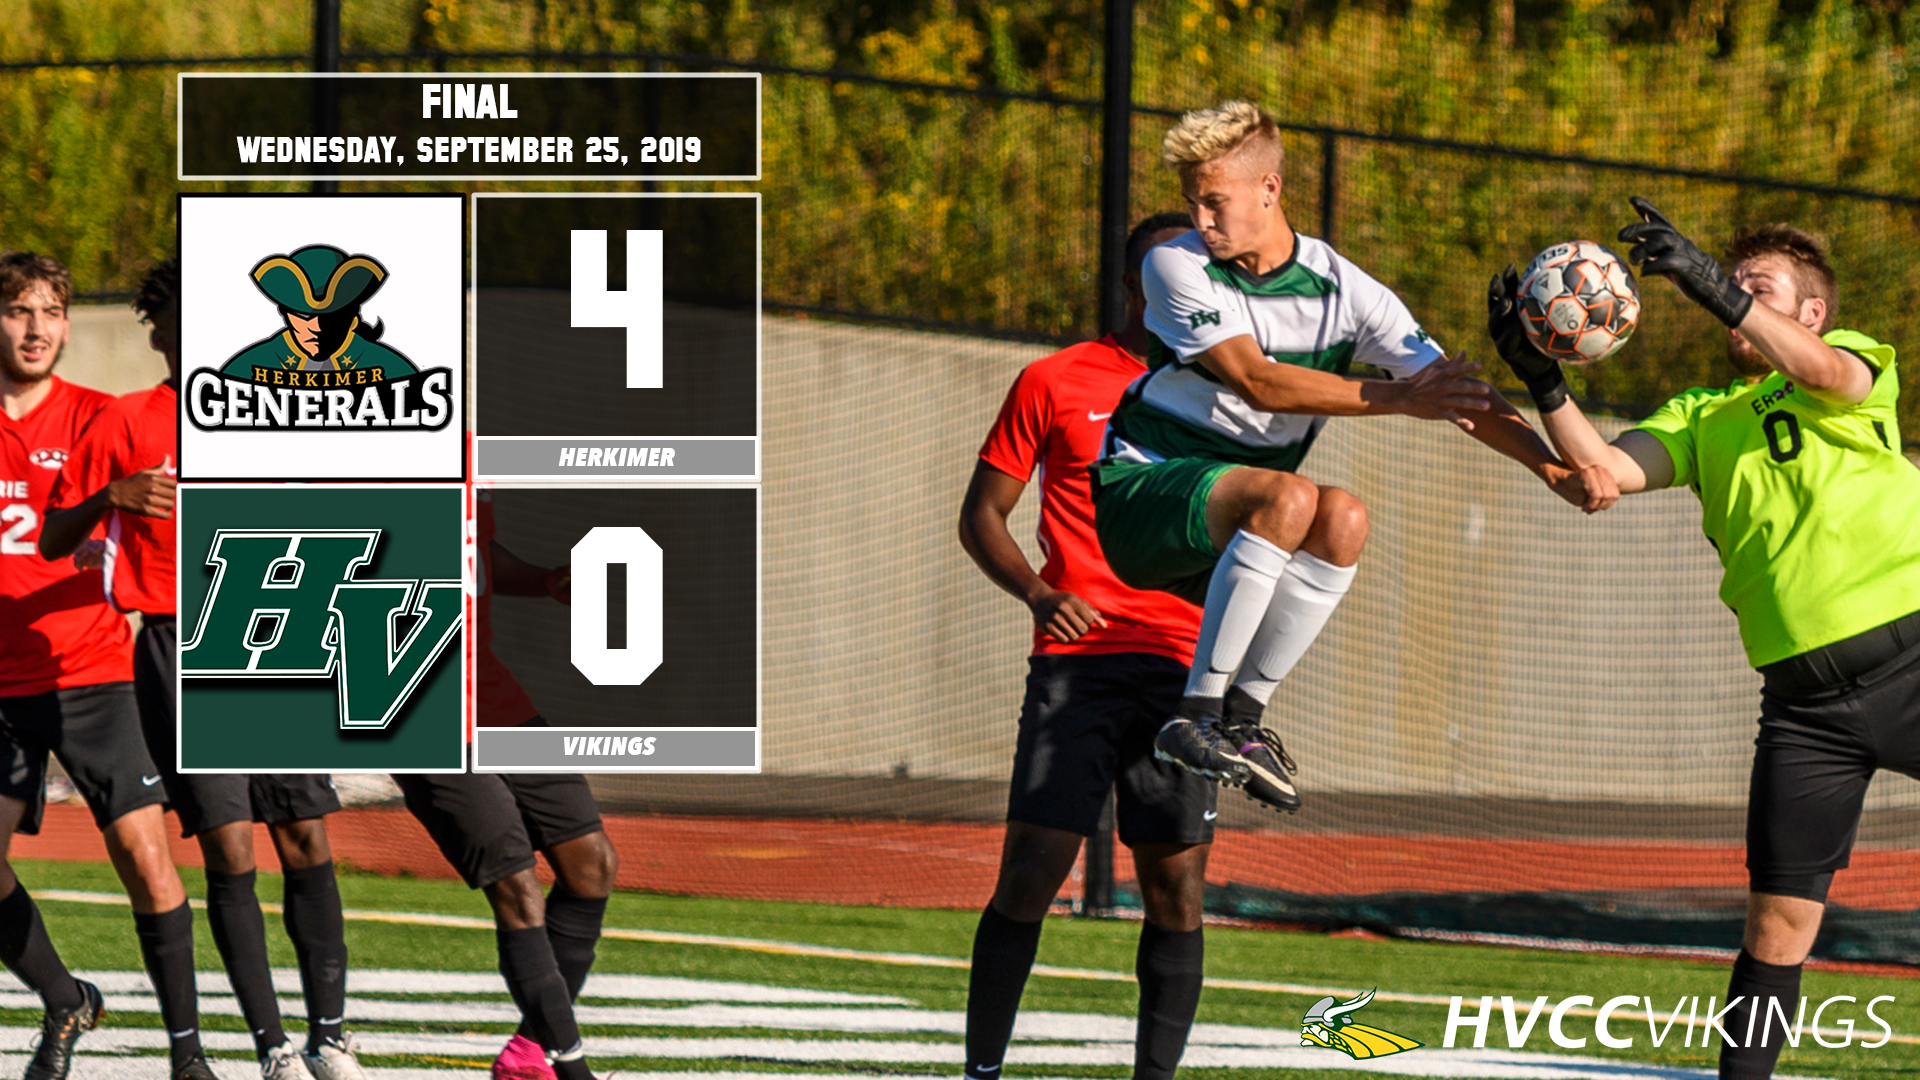 Men's Soccer was defeated 4-0 at home to Herkimer on 9.25.19.